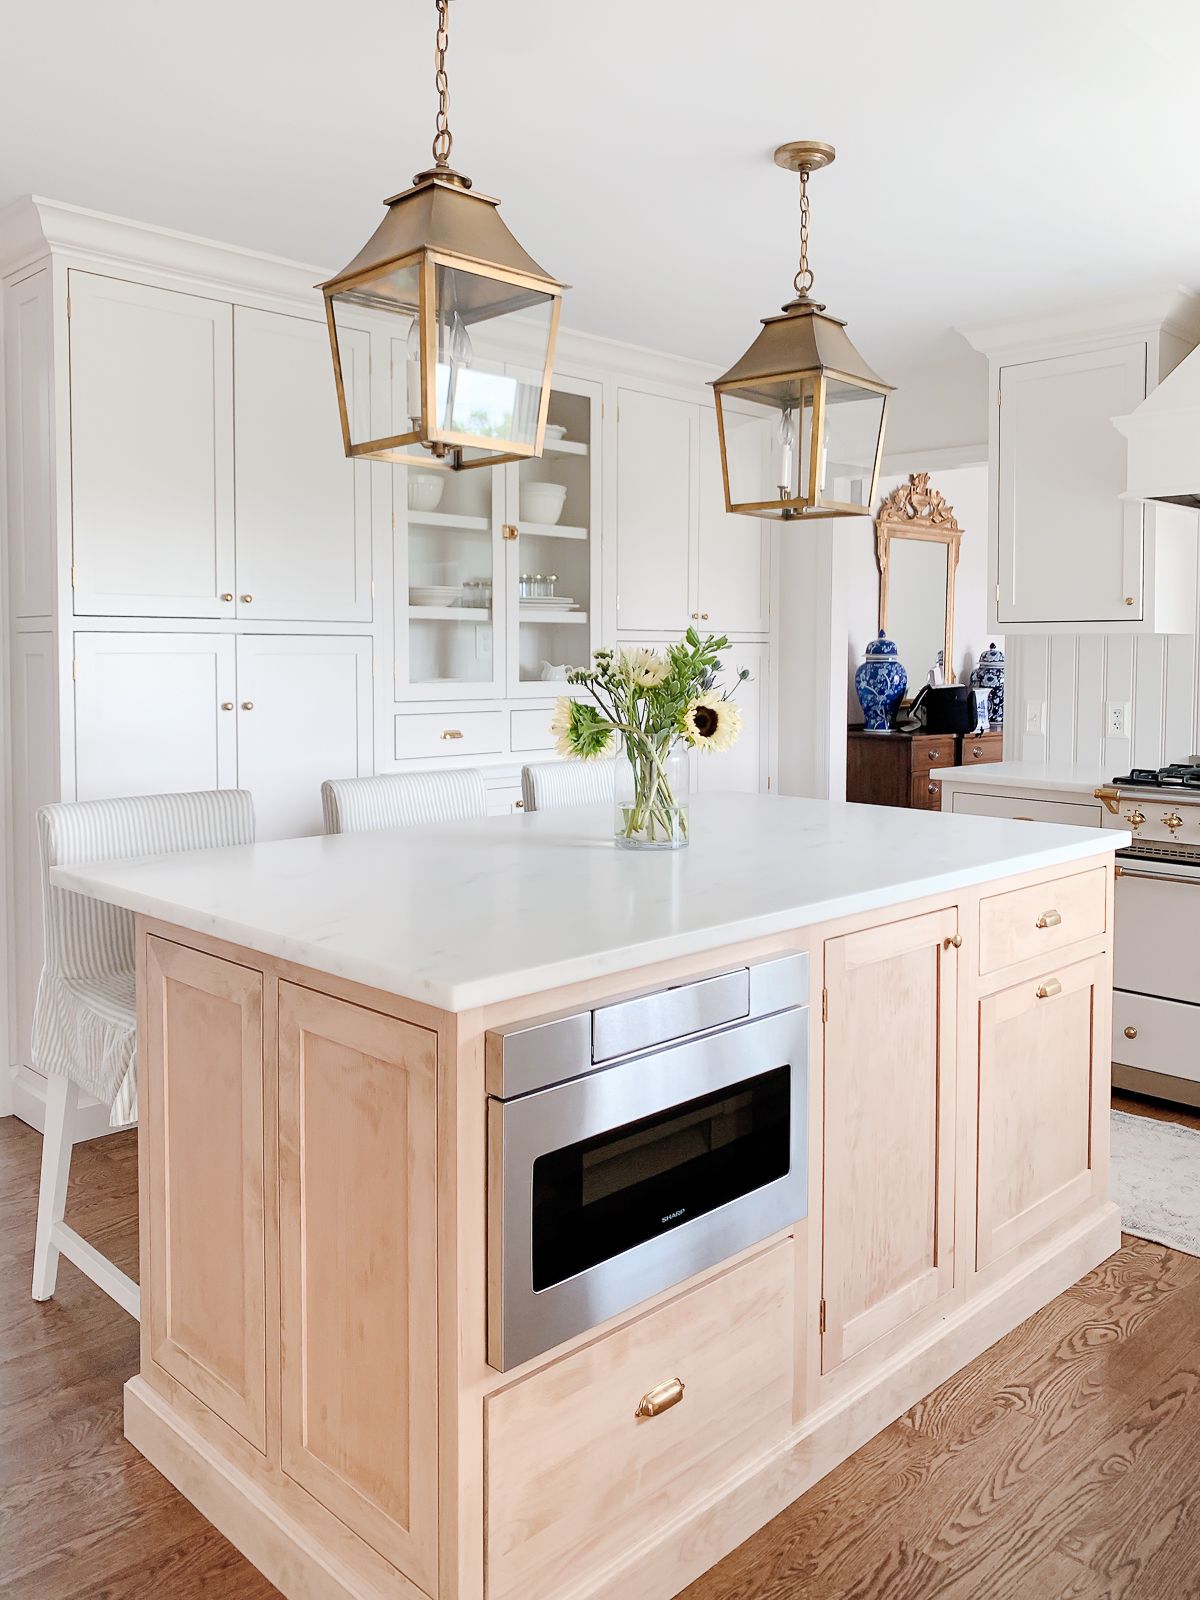 A light oak wood kitchen island with a built in microwave, surrounding cabinets are cream.